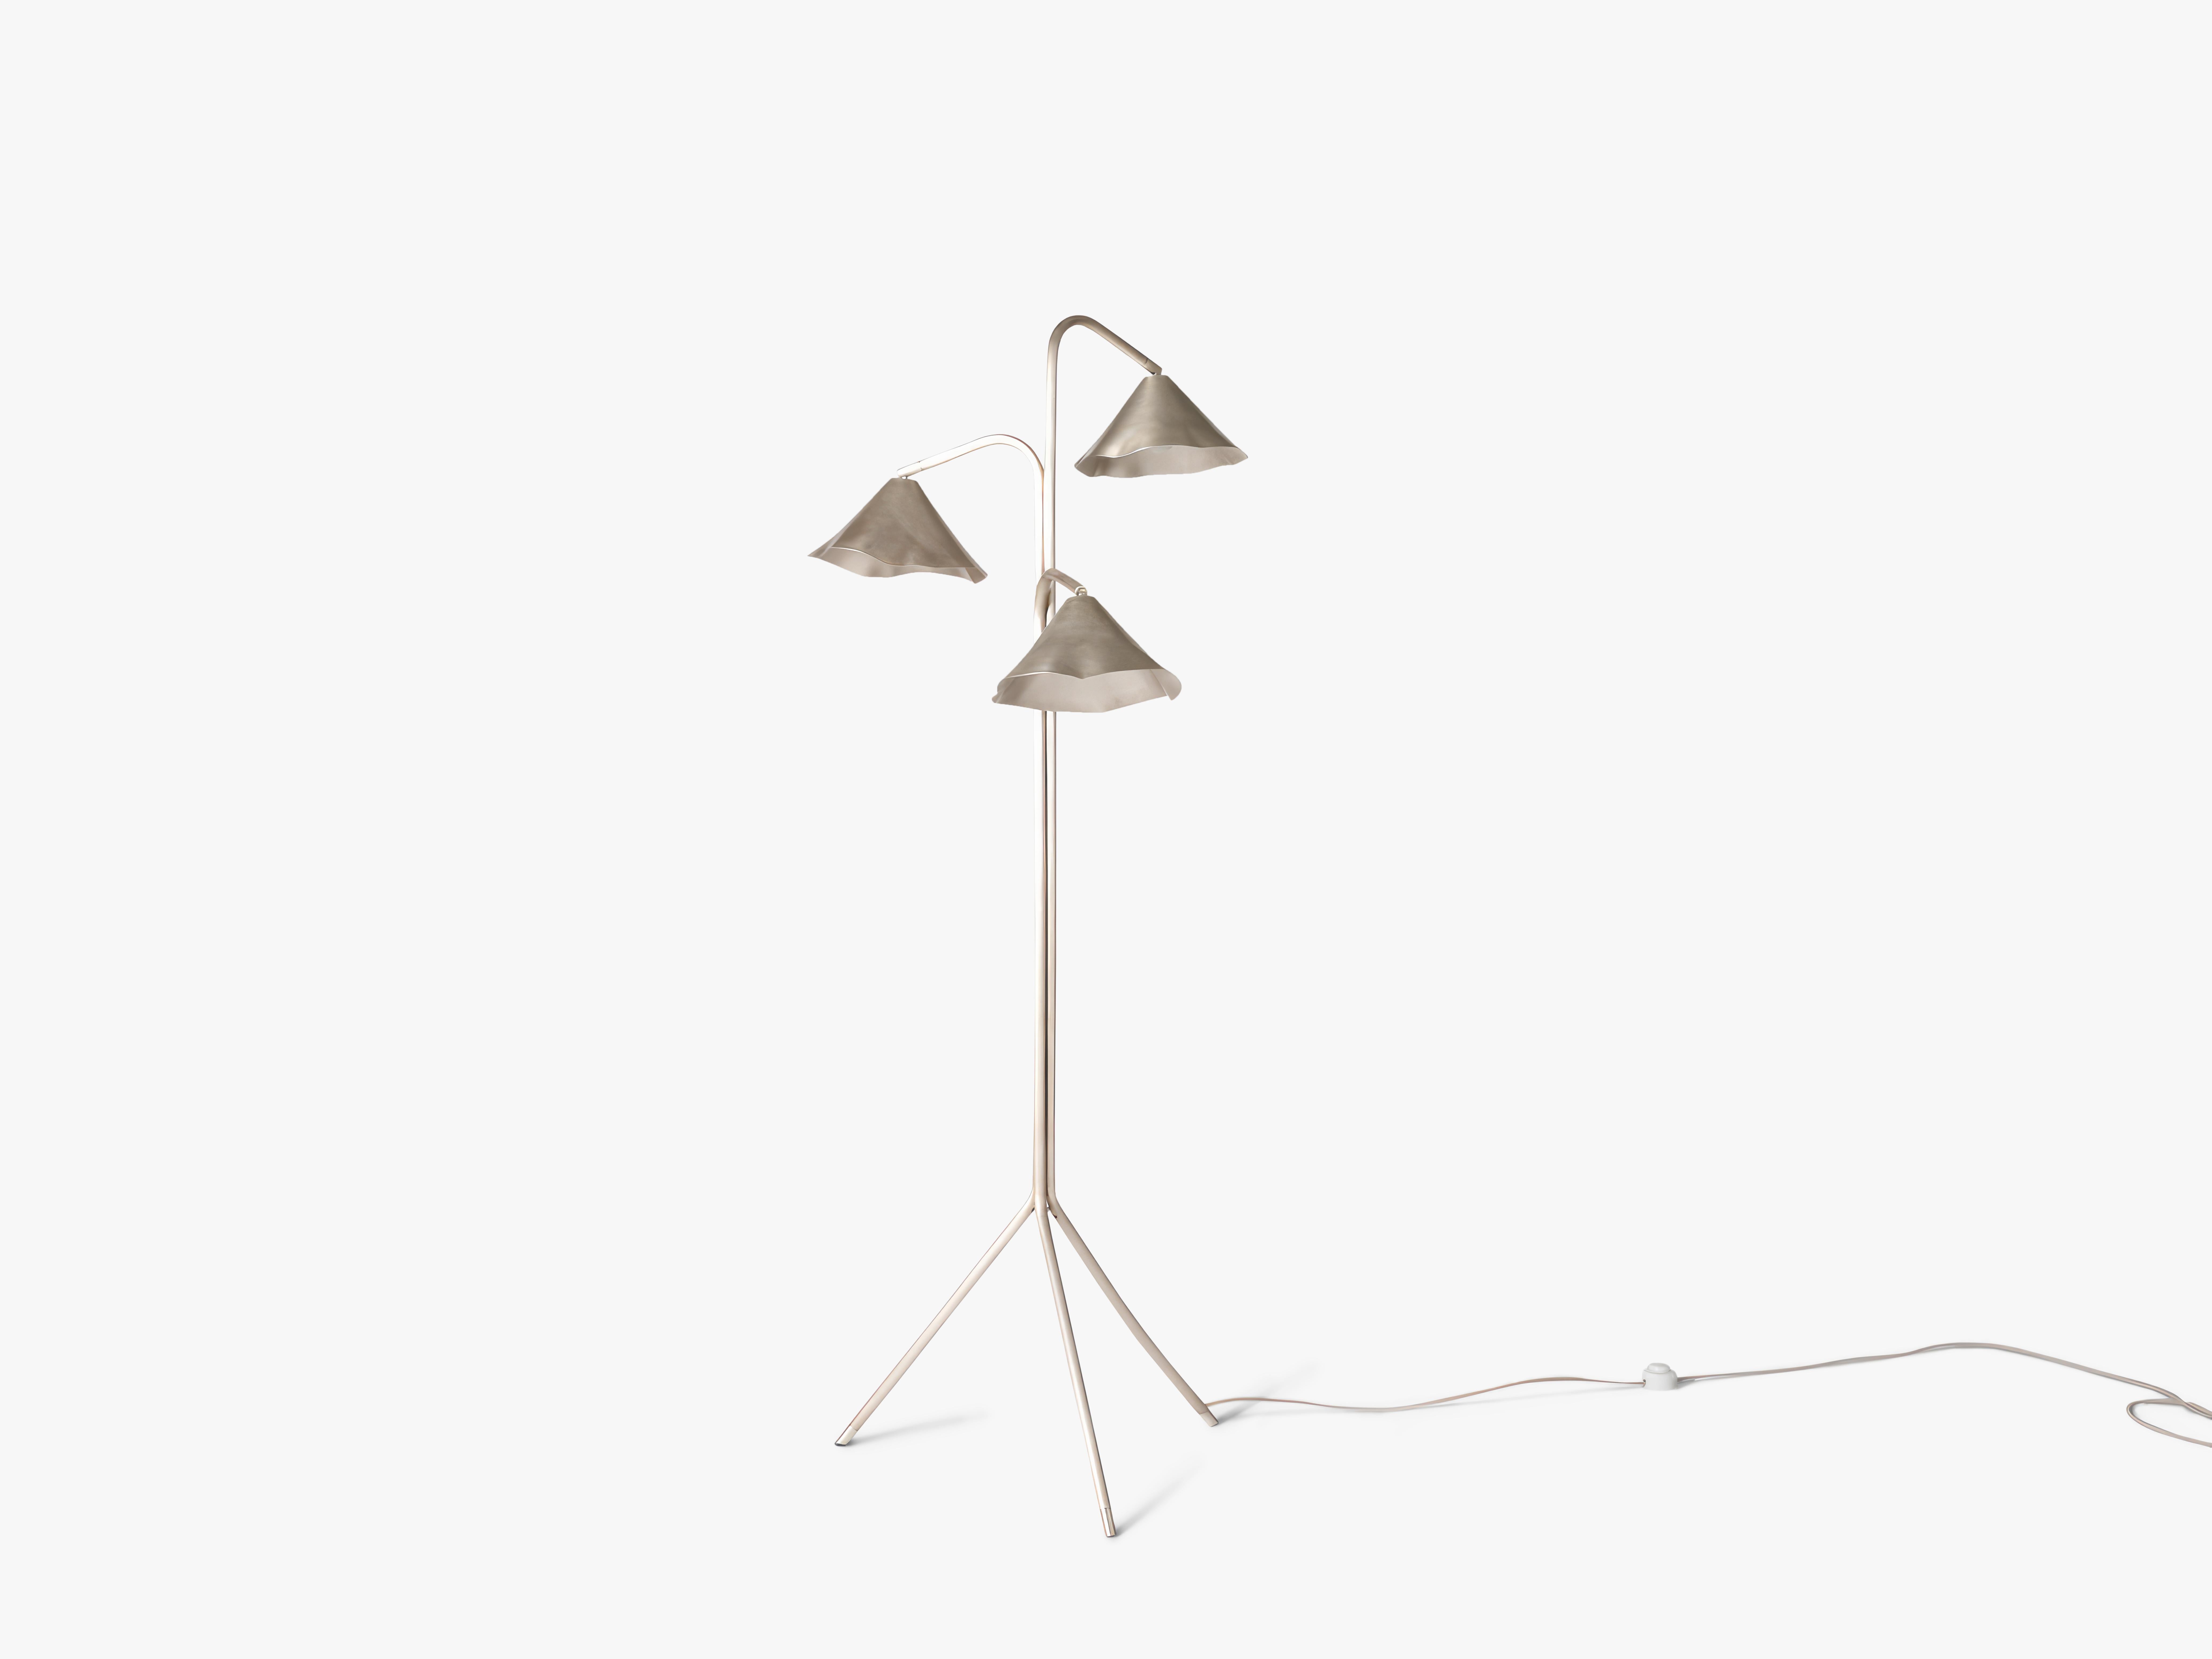 Silver Antica I Floor Lamp by OHLA STUDIO
Dimensions: D 50 x W 54 x H 150 cm 
Materials: Copper.
8 kg

Available in other finishes: Silver, Forest, and Teal.

A pre-Hispanic smithing tradition thrives by recycling copper scraps into contemporary